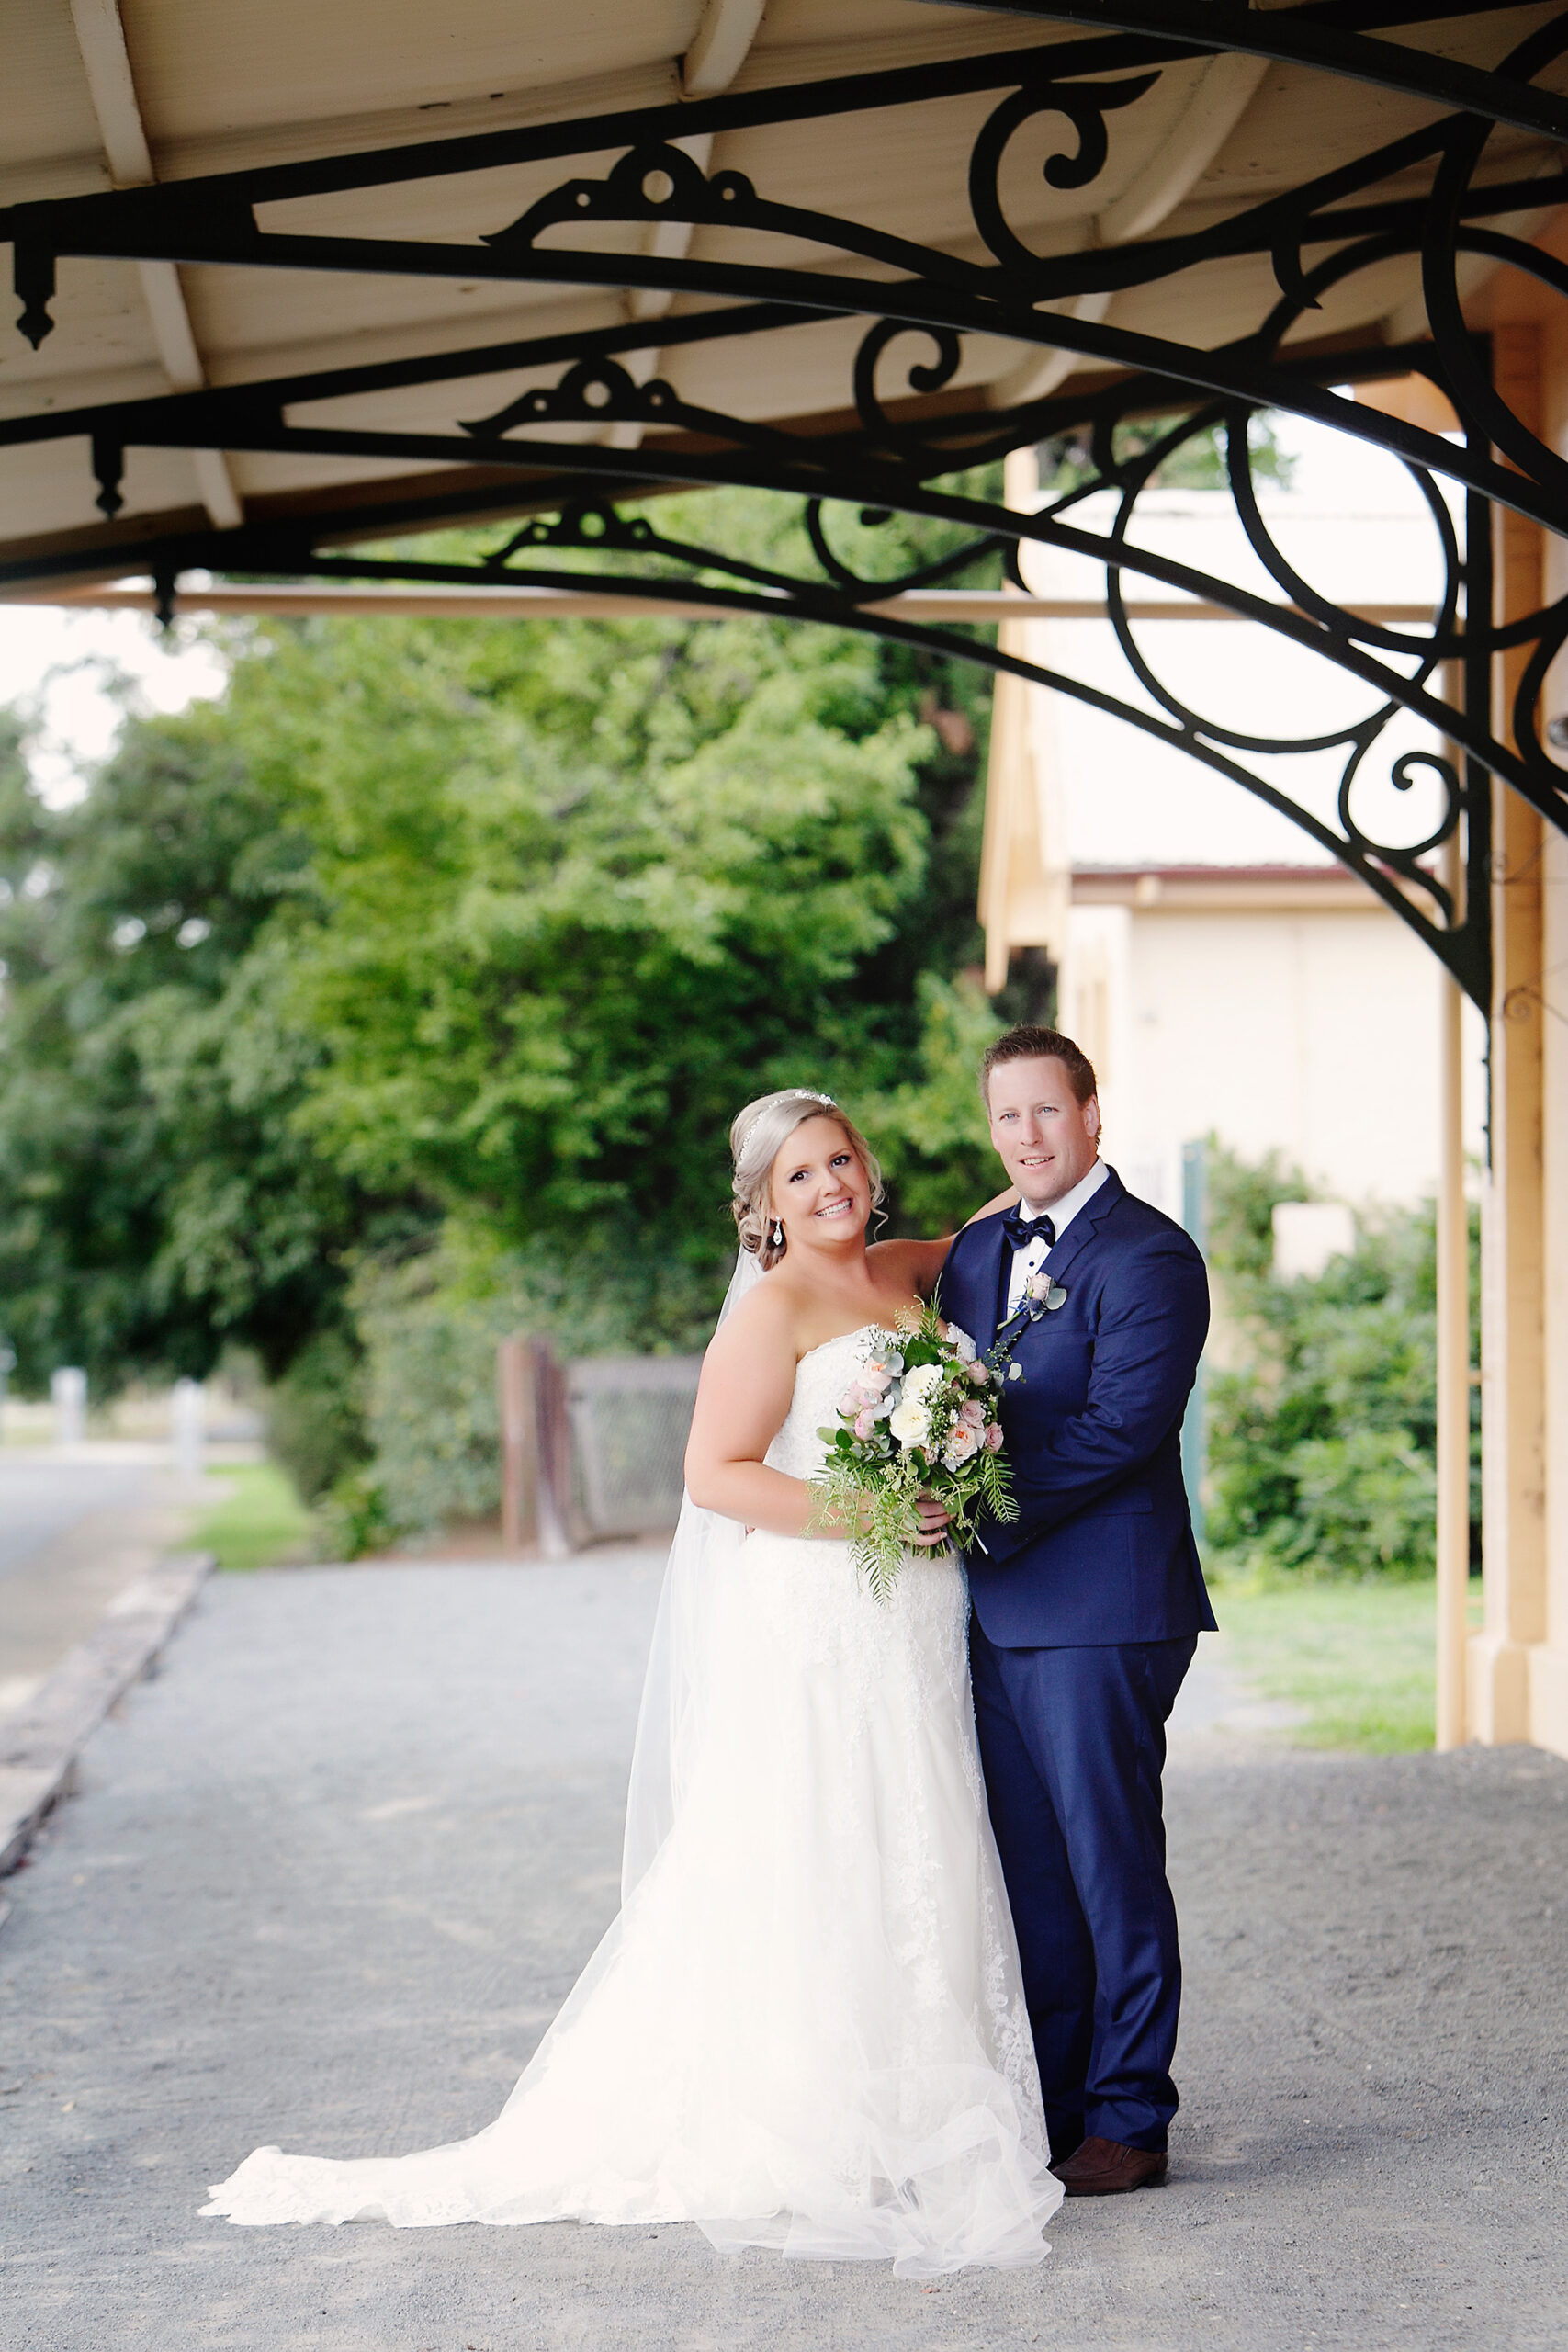 Jayne_Damian_Classic-Country-Wedding_Leanne-Whitley-Photography_008